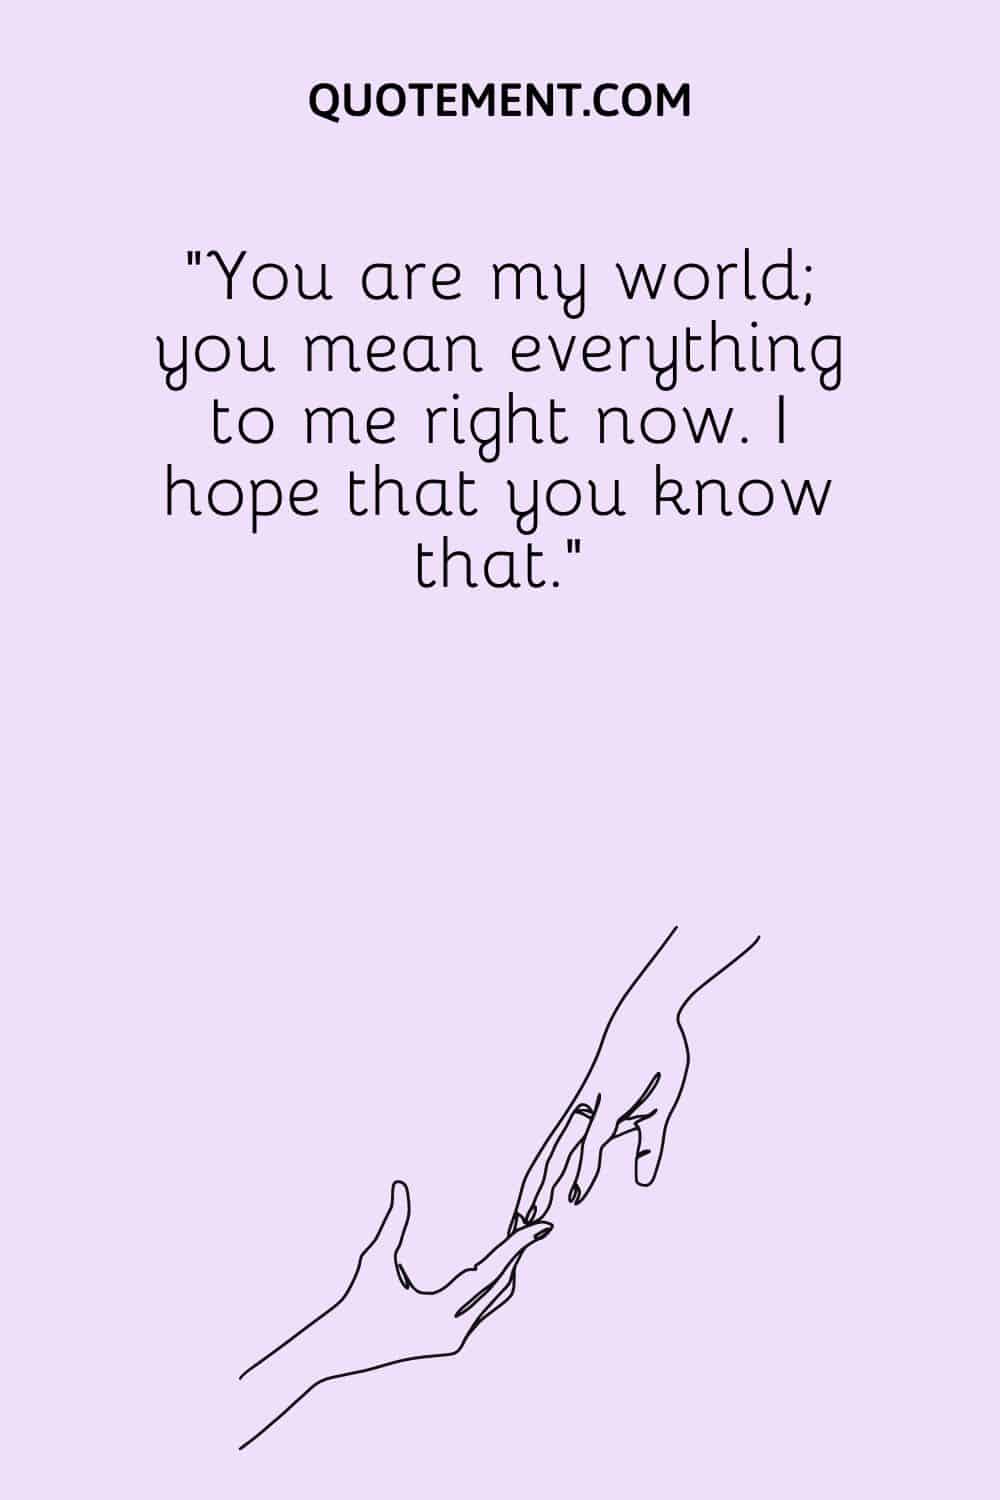 You are my world; you mean everything to me right now. I hope that you know that.